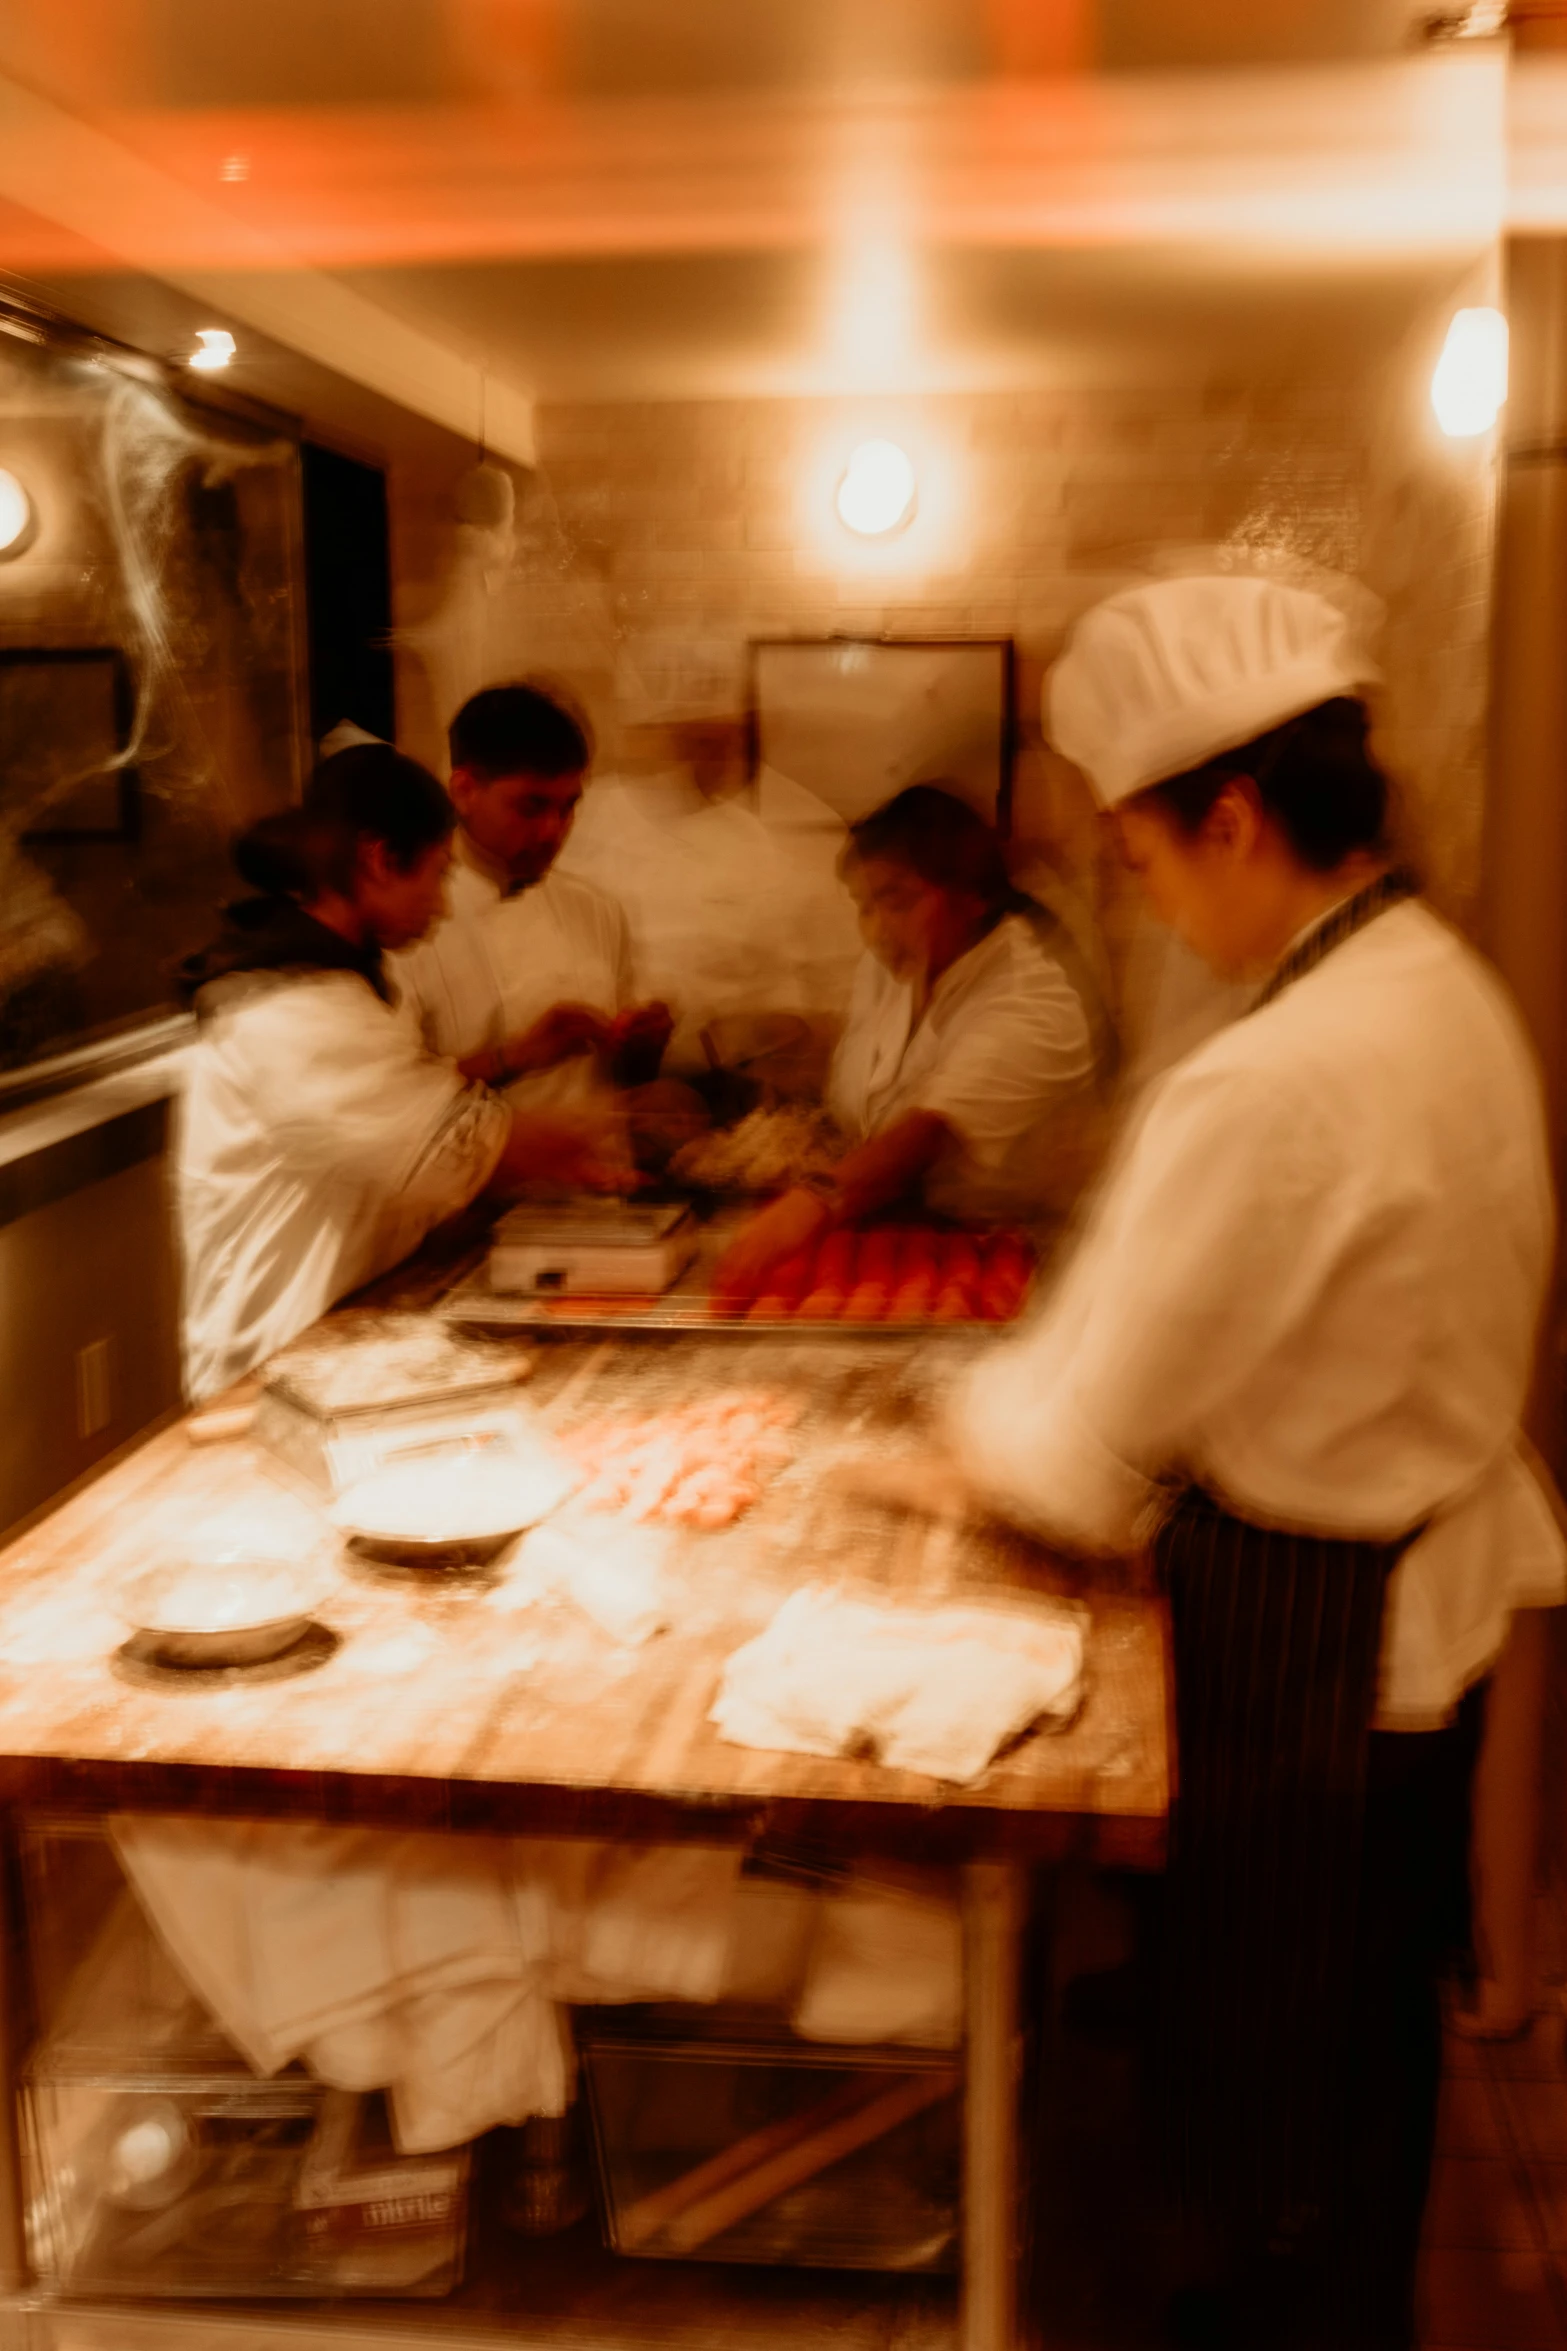 a group of men in the kitchen preparing food